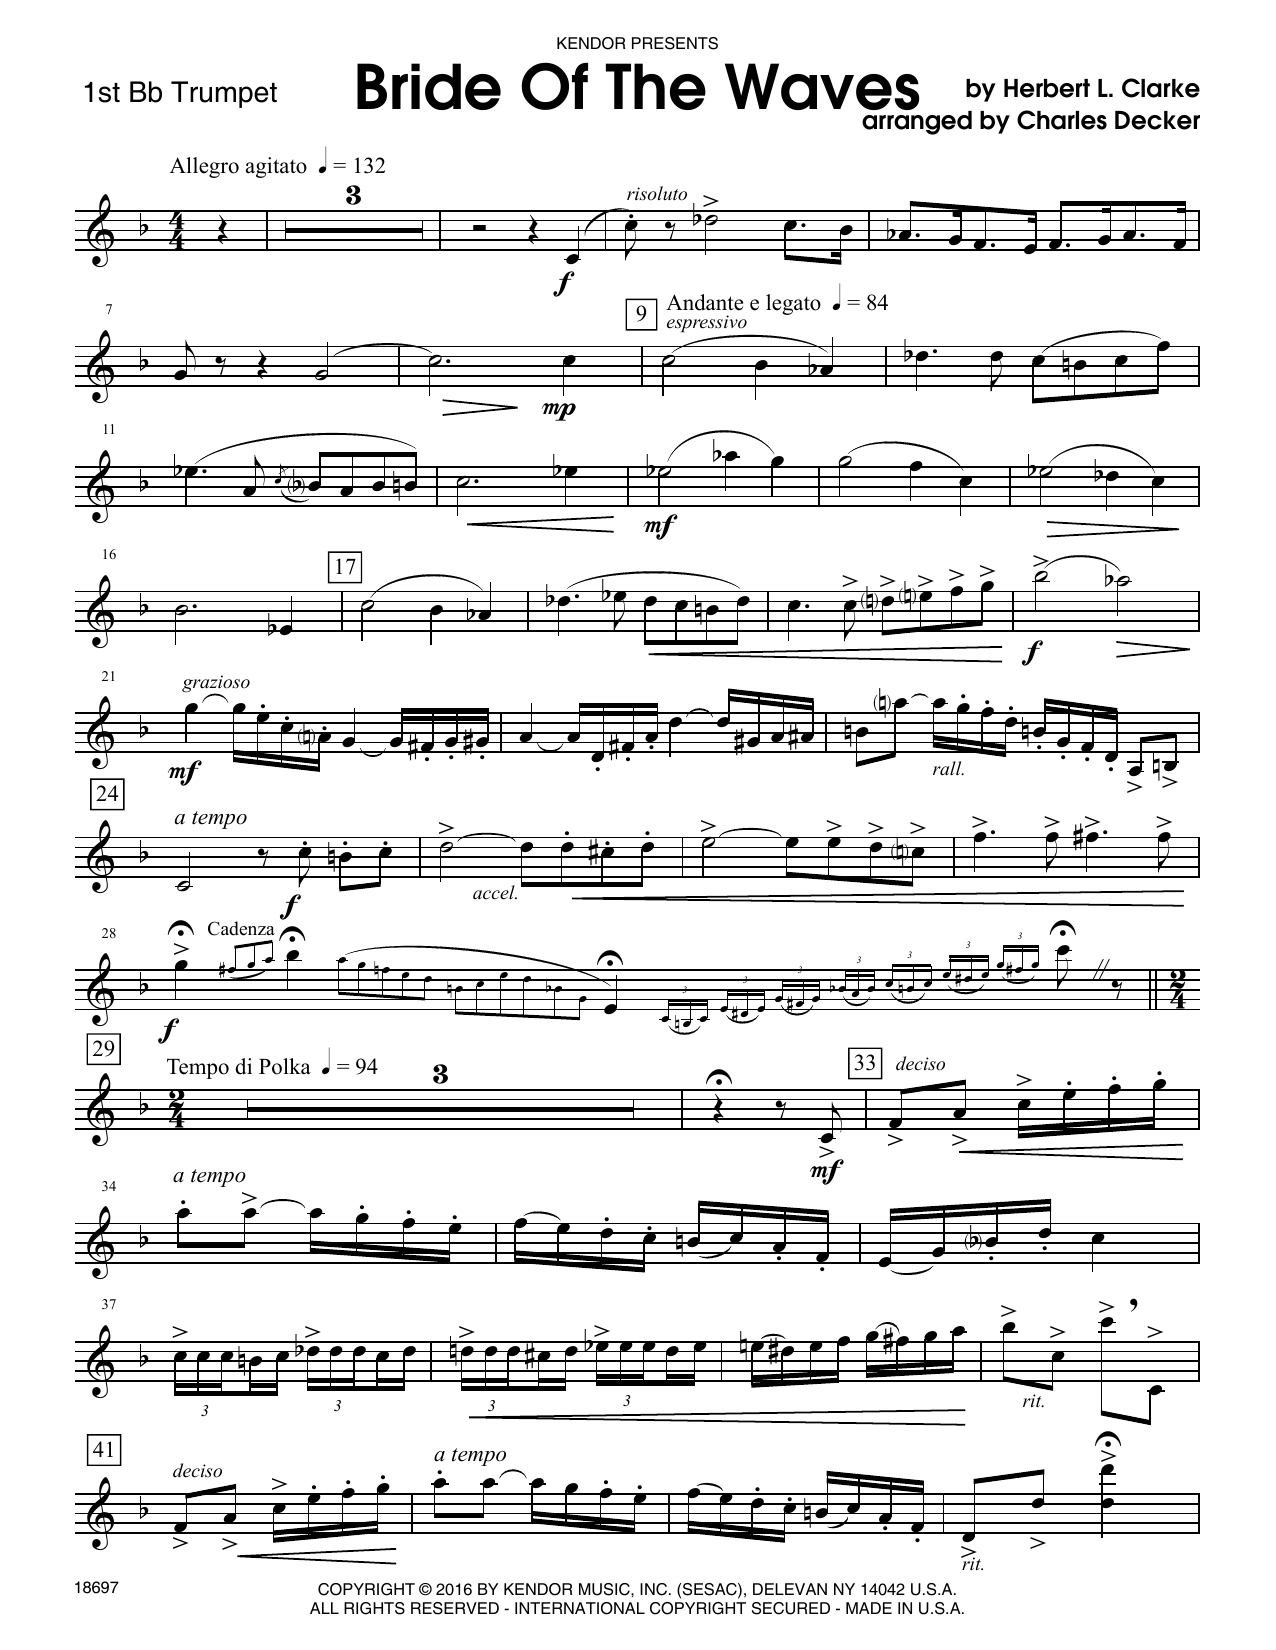 Decker Bride Of The Waves - 2nd Bb Trumpet sheet music notes and chords. Download Printable PDF.